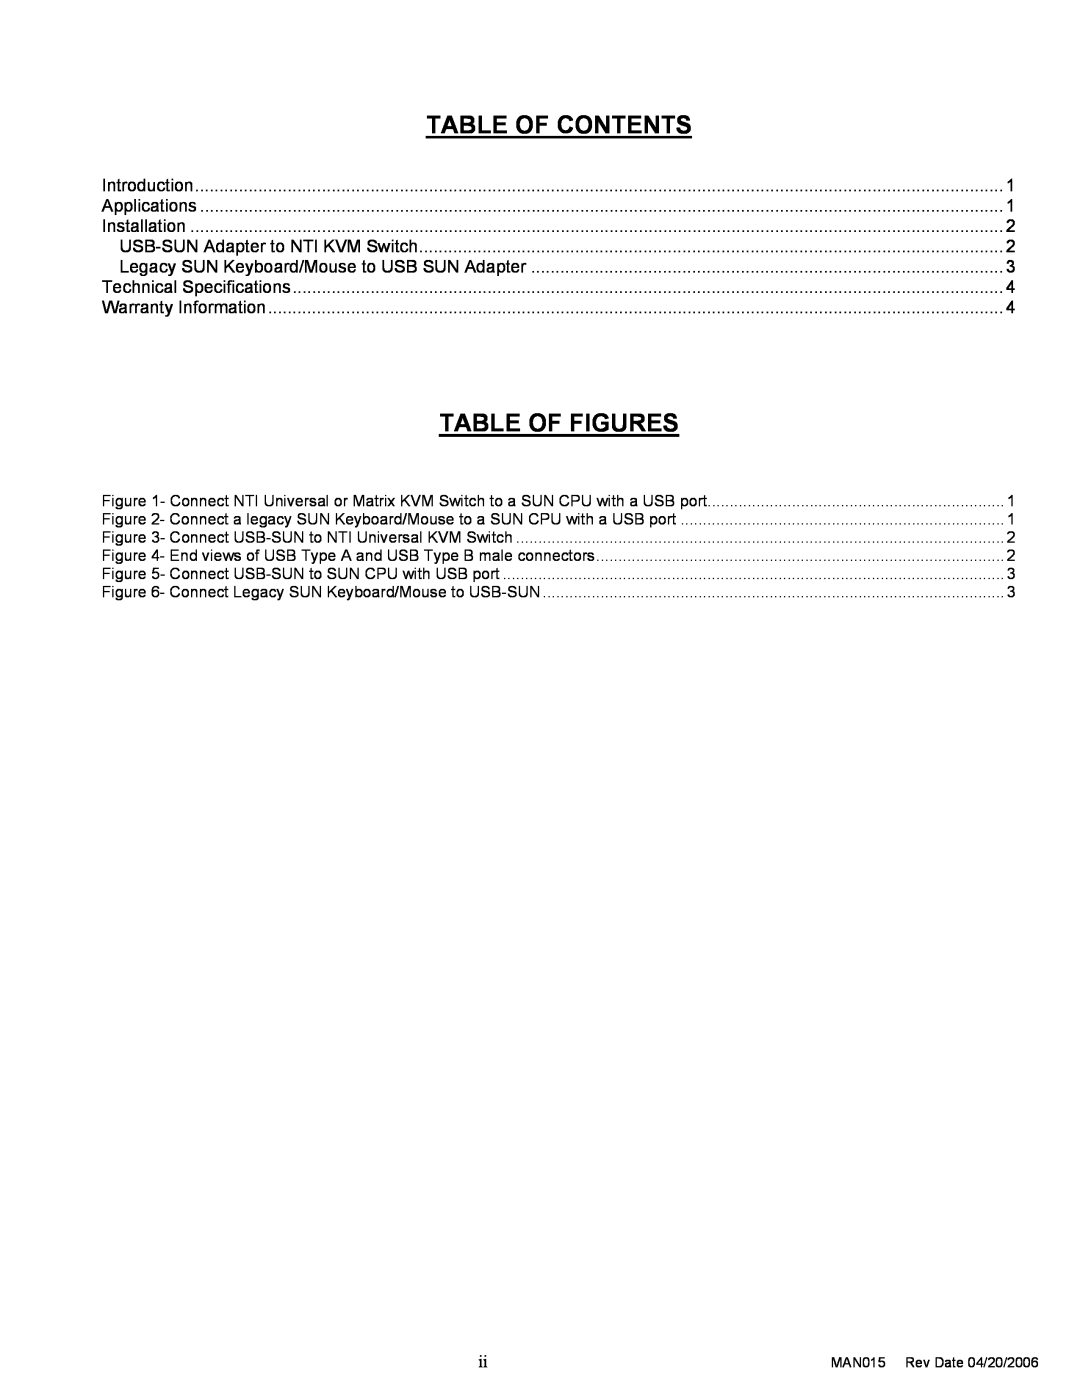 Network Technologies MAN015 installation manual Table Of Contents, Table Of Figures 